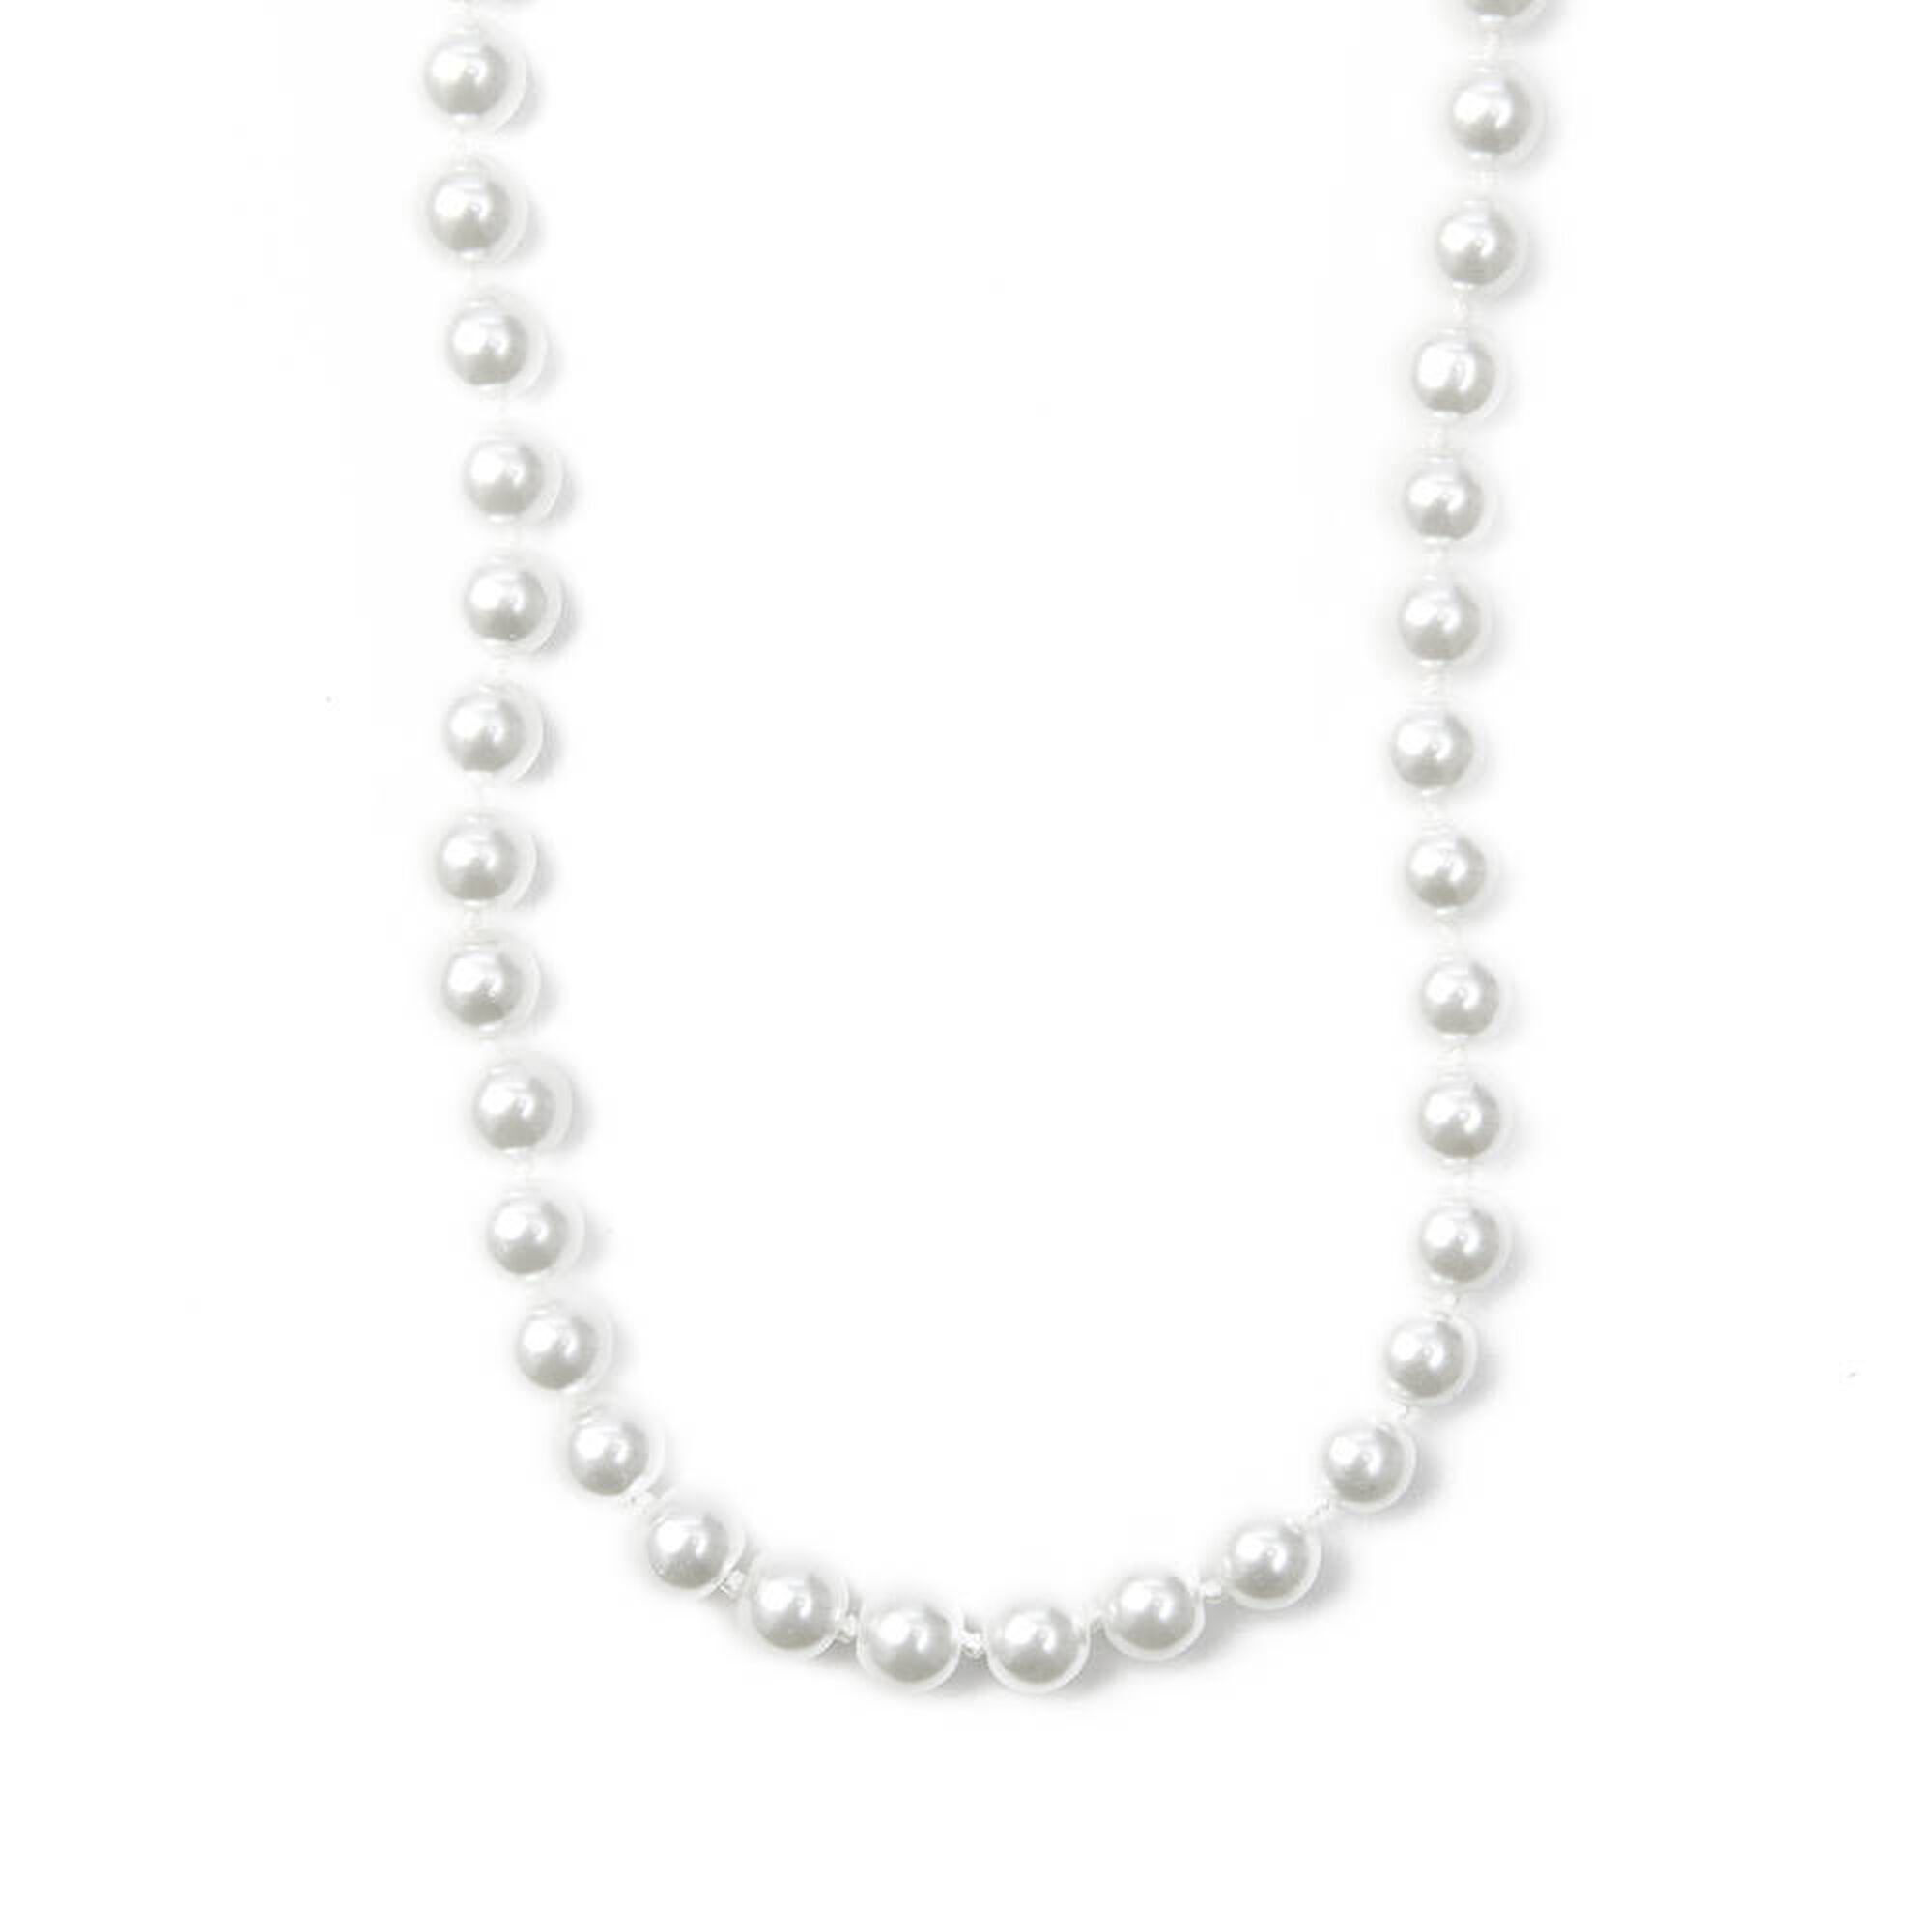 1930s Art Deco Style Jewelry – Costume Jewelry Icing Classic 8MM White Pearl 20 Necklace $12.99 AT vintagedancer.com